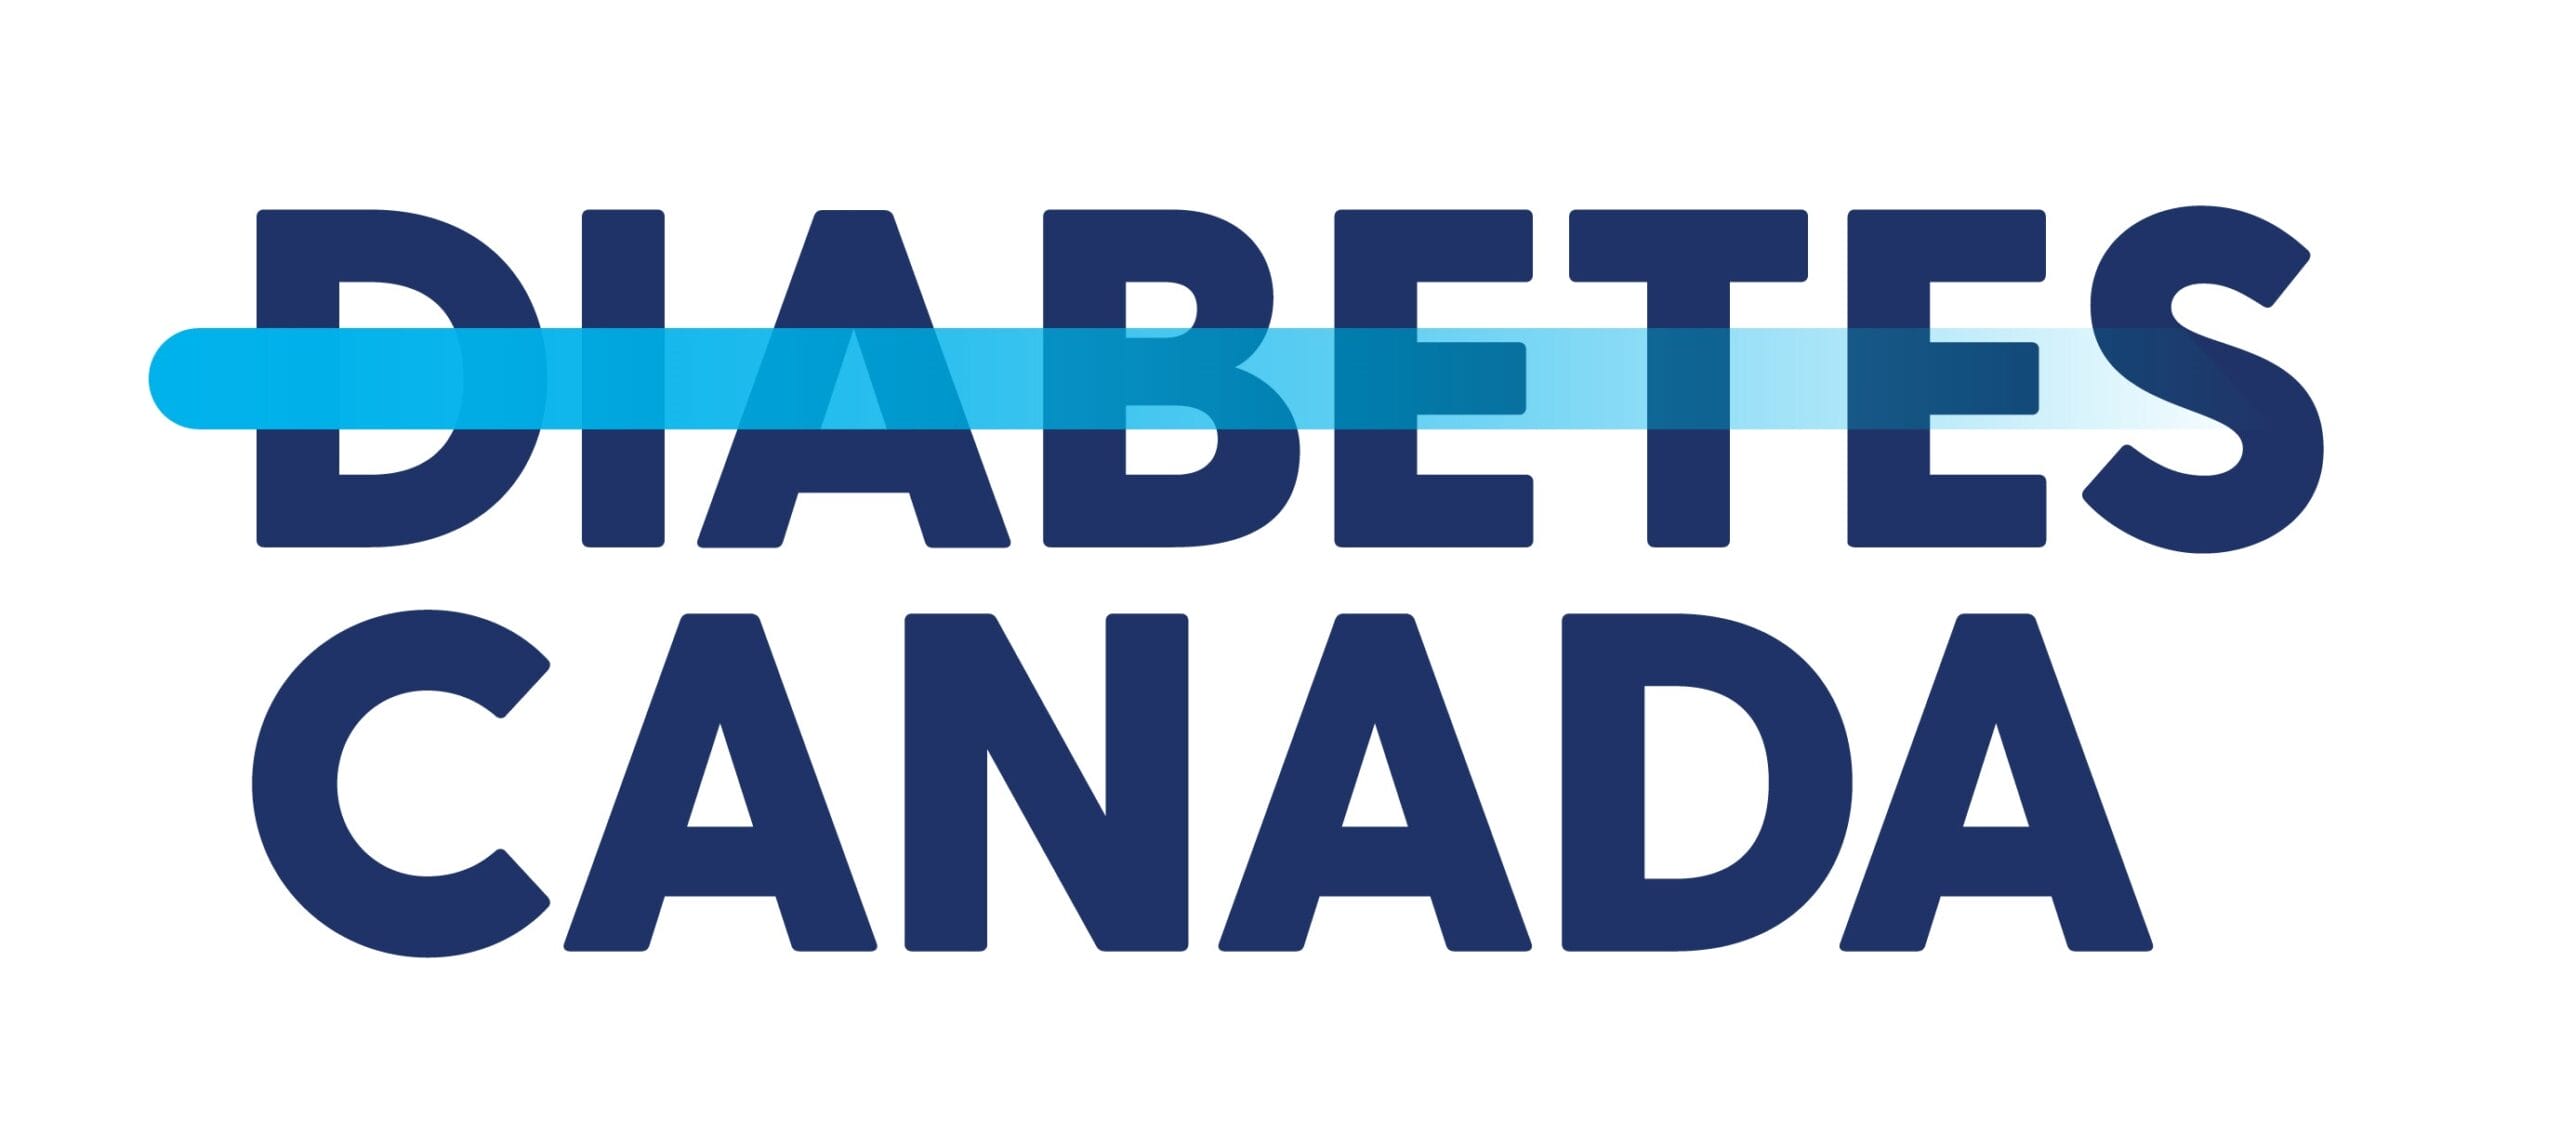 Diabetes Canada logo with the word "DIABETES" partially crossed out by a blue line.